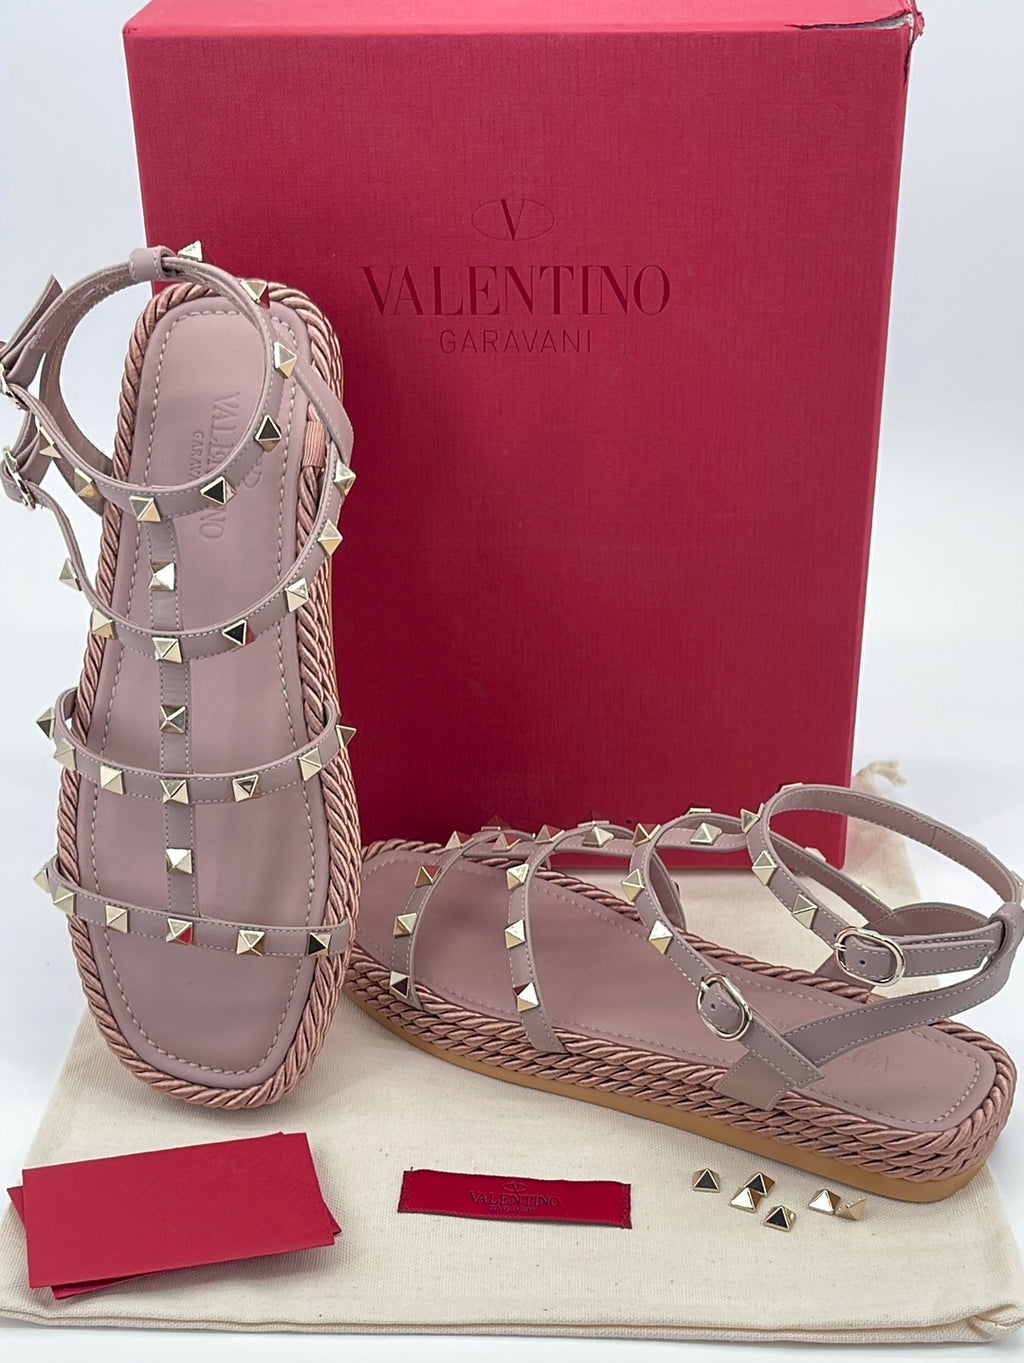 GIFTABLE NEW Valentino Rockstud Poudre Flat Sandals Size 38 (8) 246 052323 $550 OFF FLASH